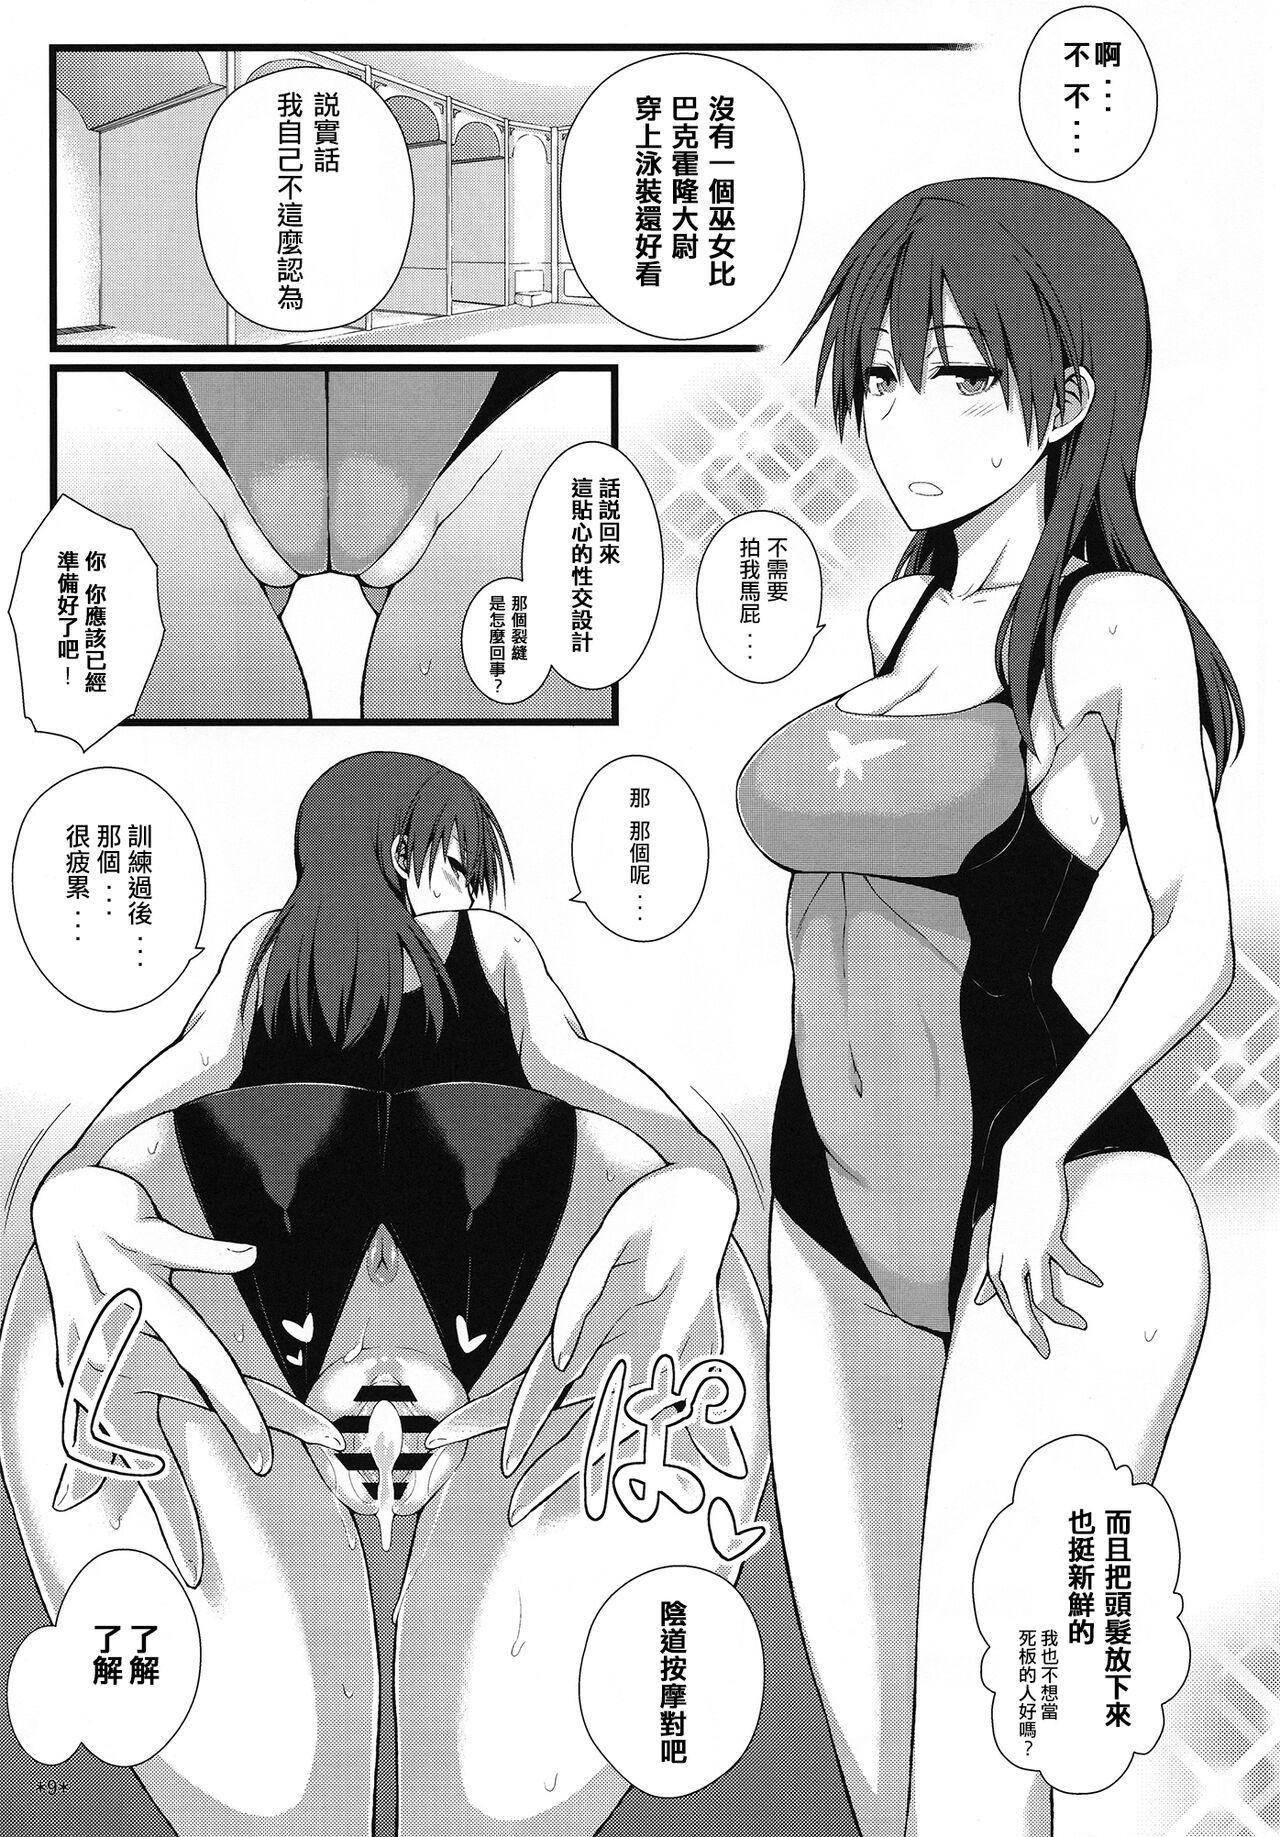 Sexy KARLSLAND ABSORB - Strike witches Cavala - Page 10